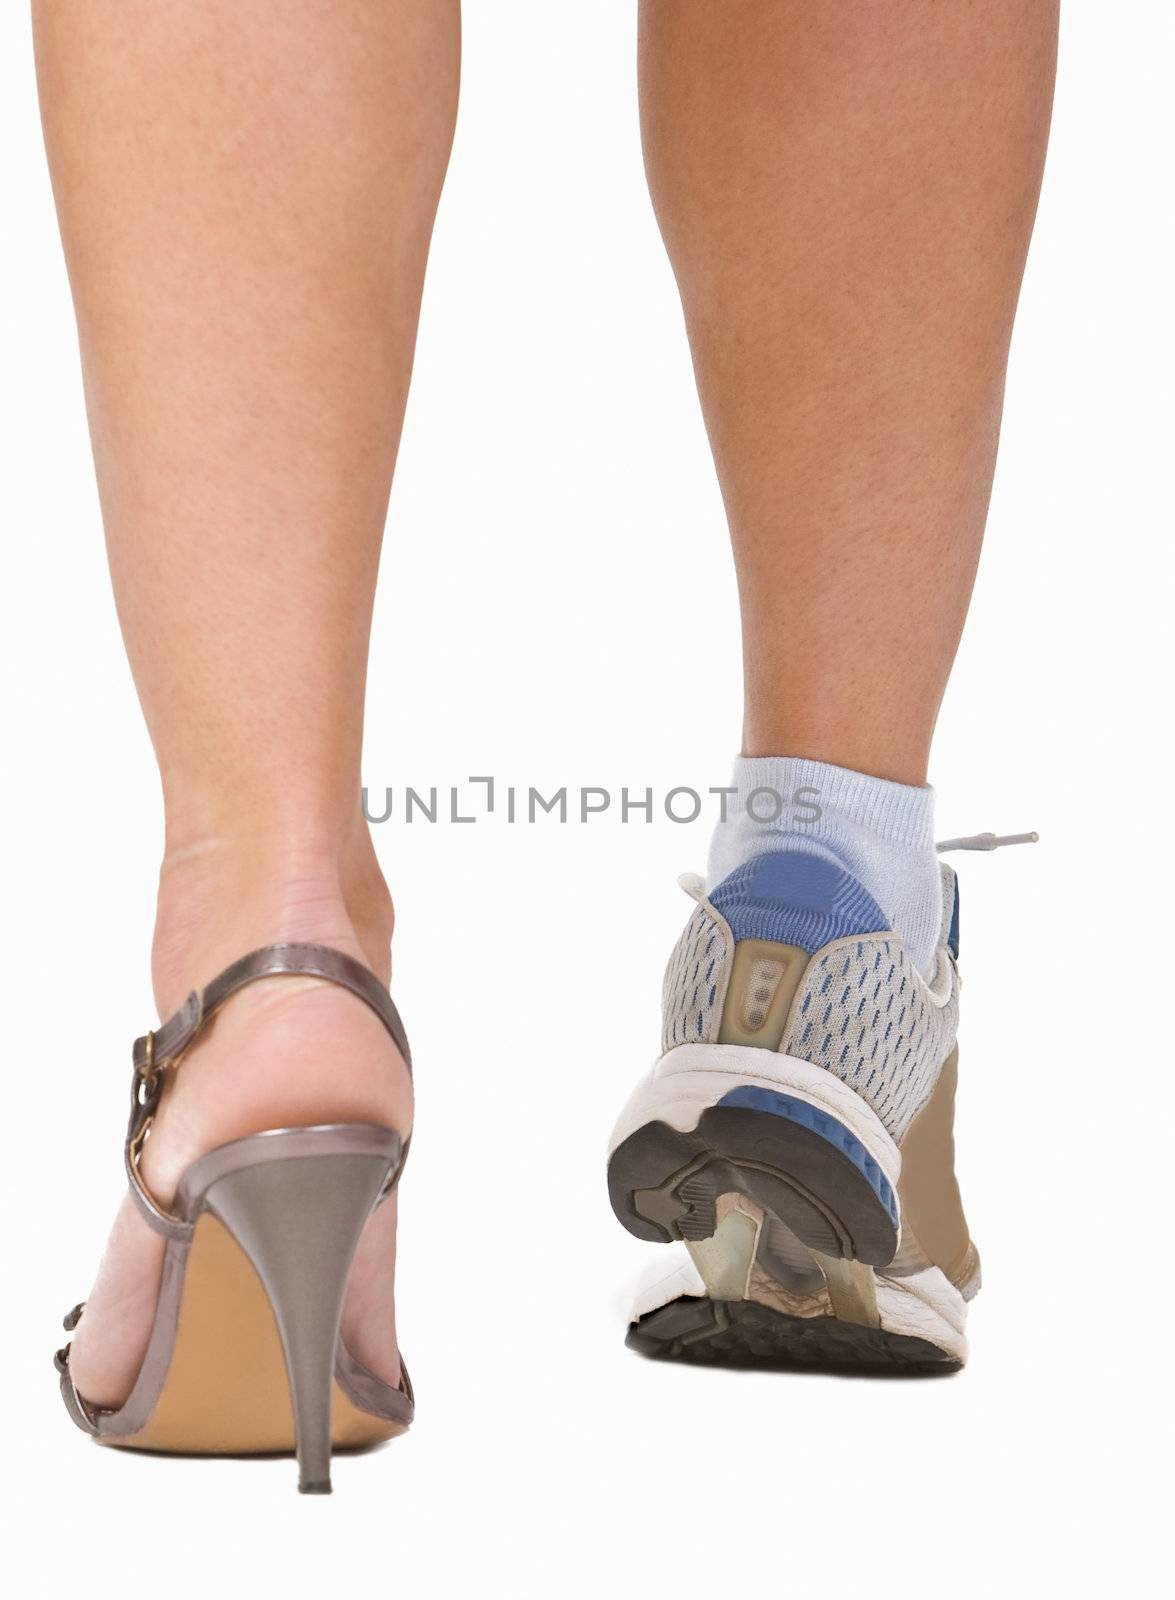 Image of a woman's legs as she is wearing a highheel sandal and a sports shoe. Conceptual abstract image which emphasizes the importance of sport.